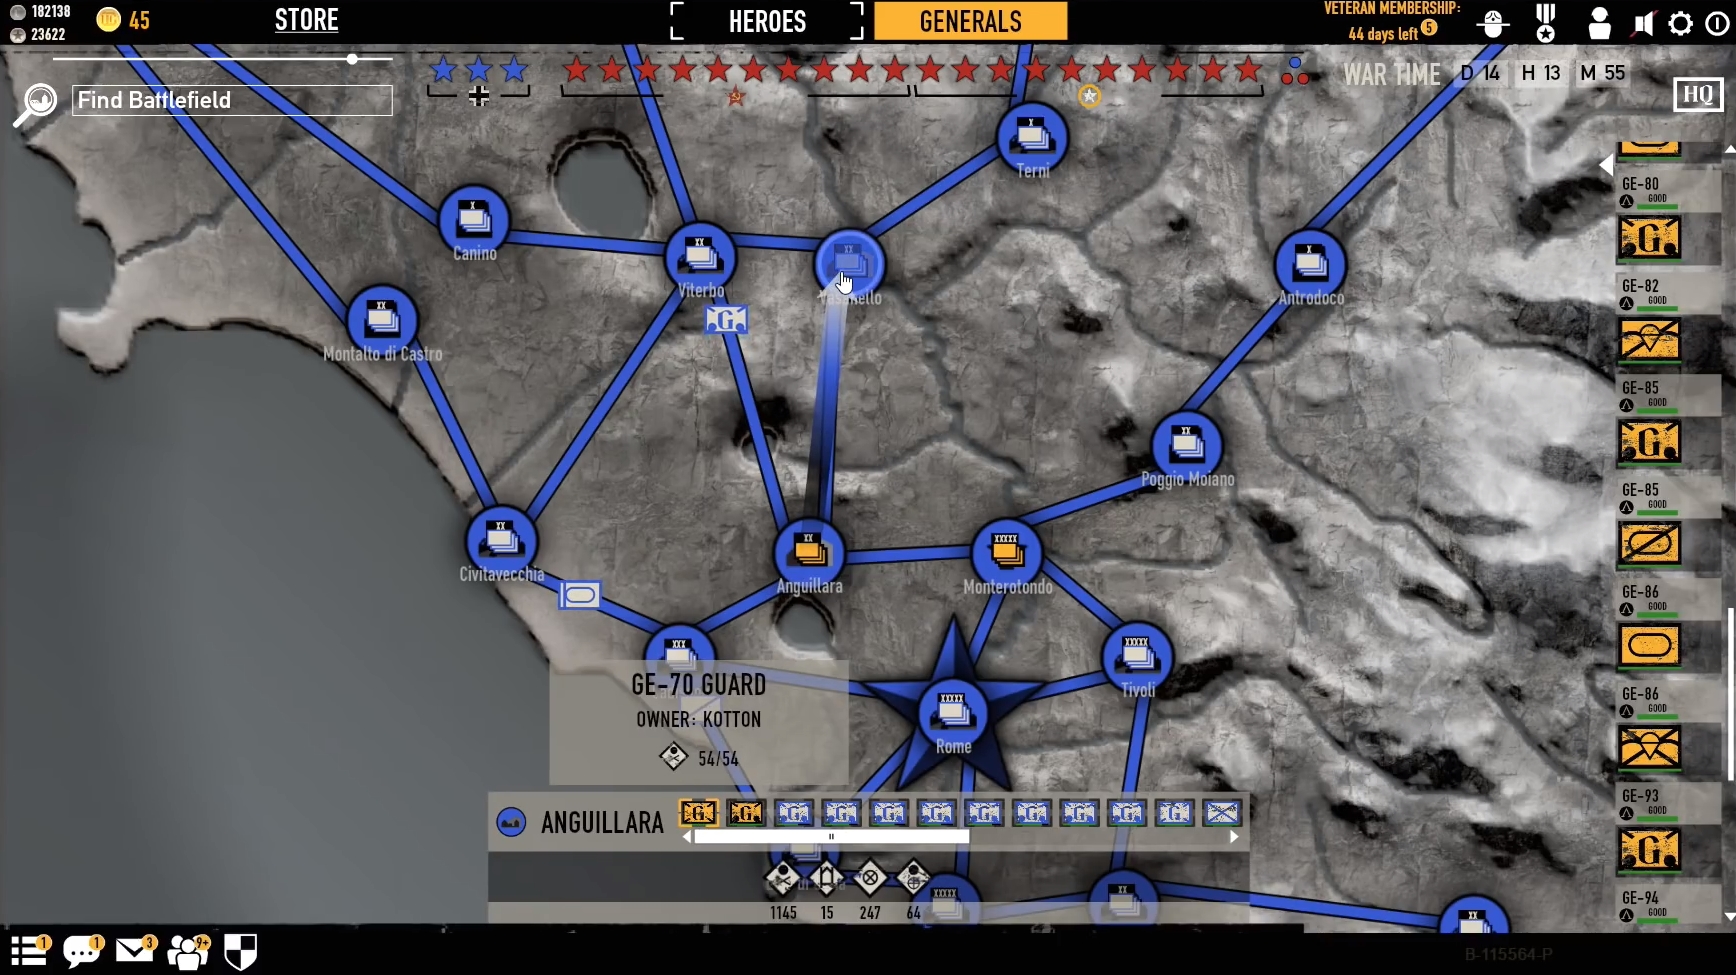 Strategy game map - move tactical units around